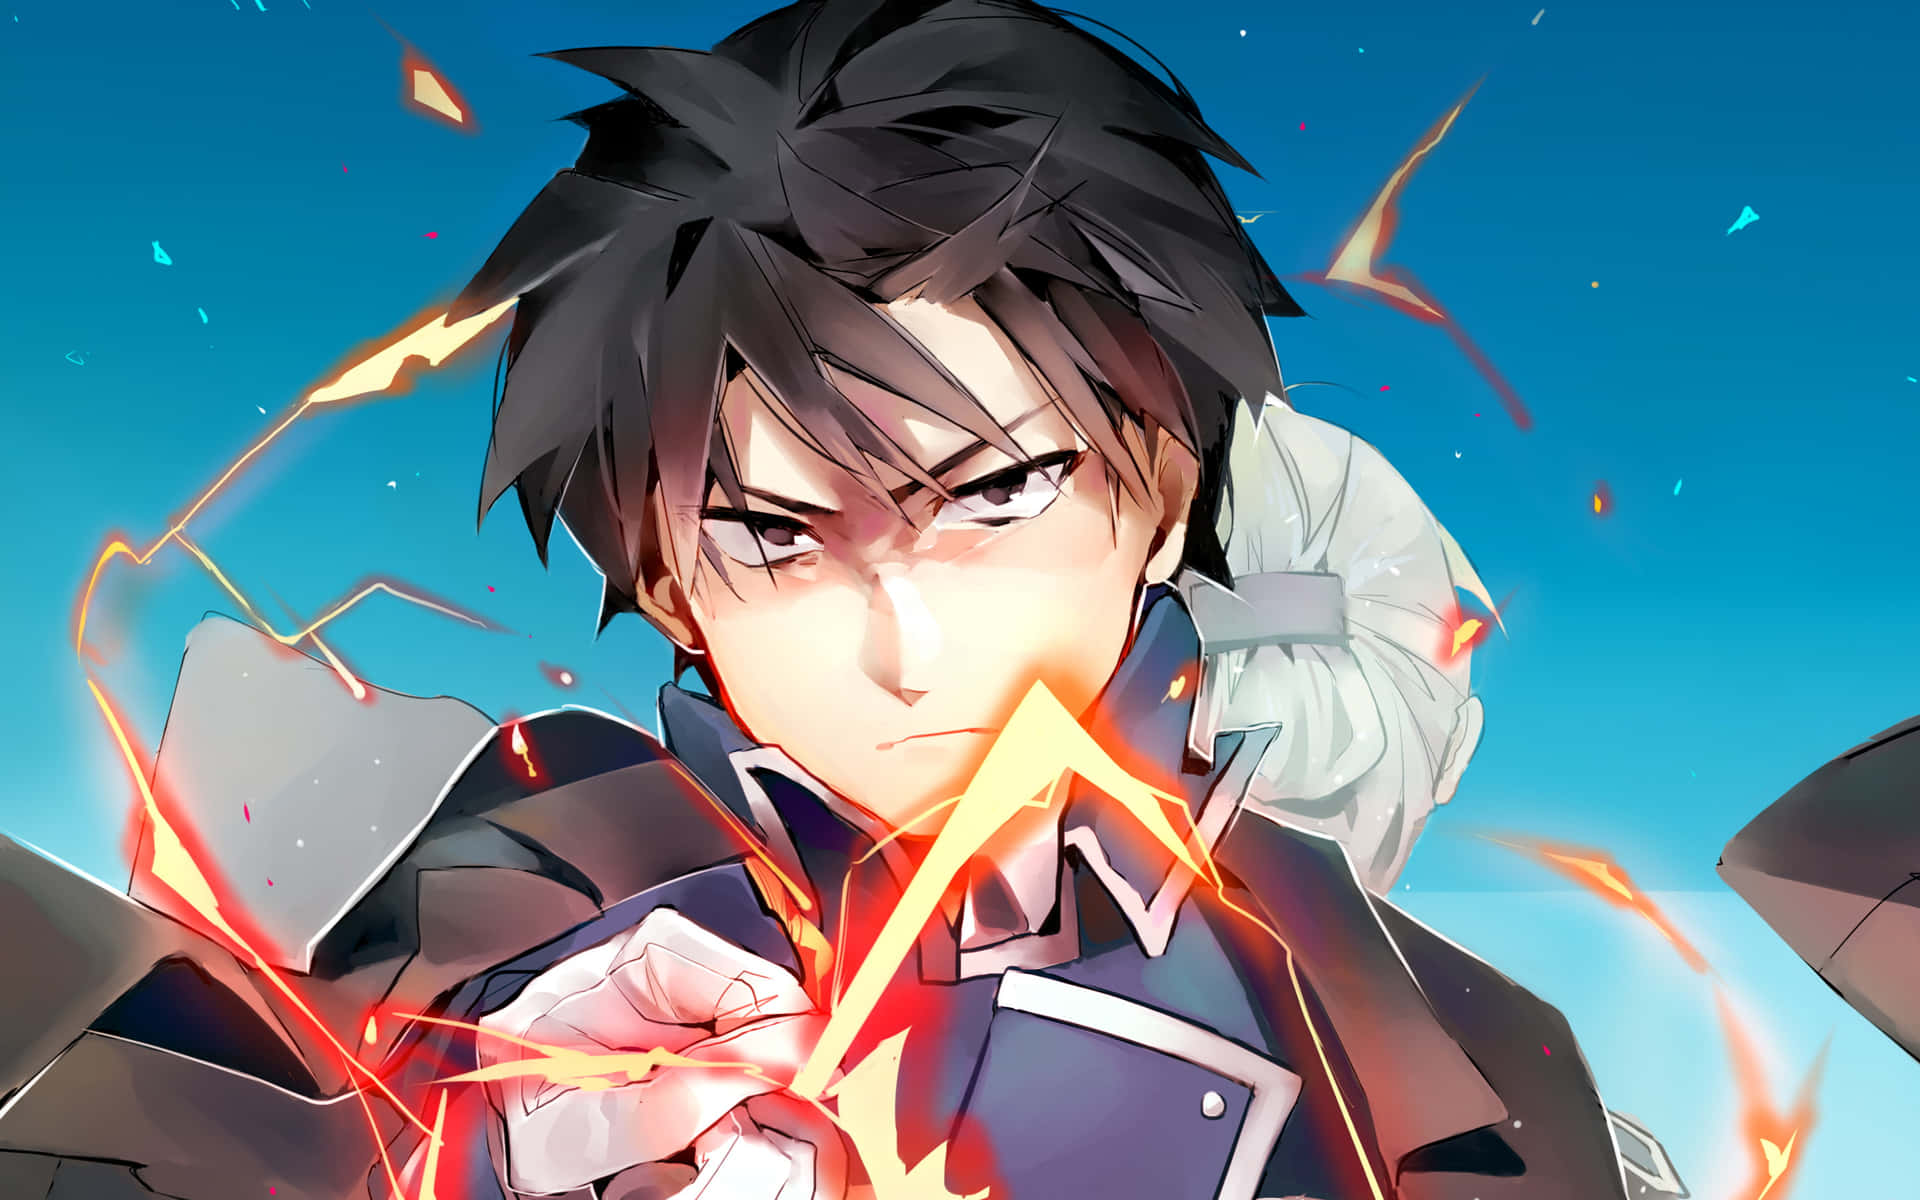 The Flame Alchemist - Roy Mustang unleashes his fiery powers. Wallpaper